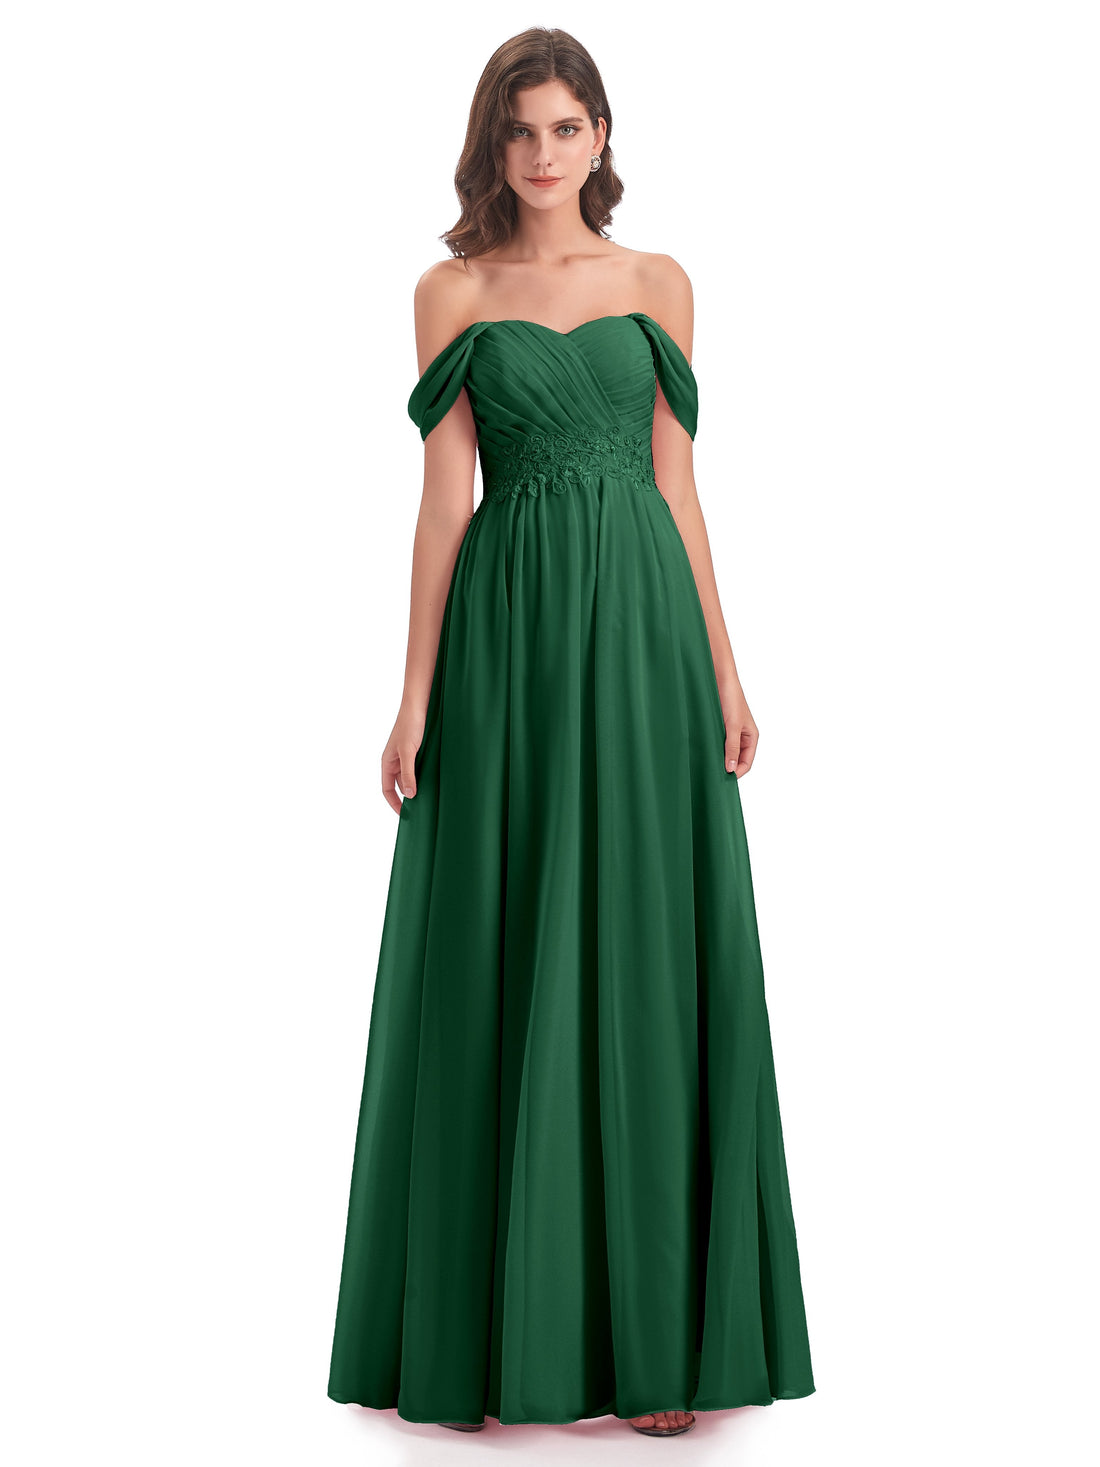 Sonia Off The Shoulder Bridesmaid Dresses With Appliques